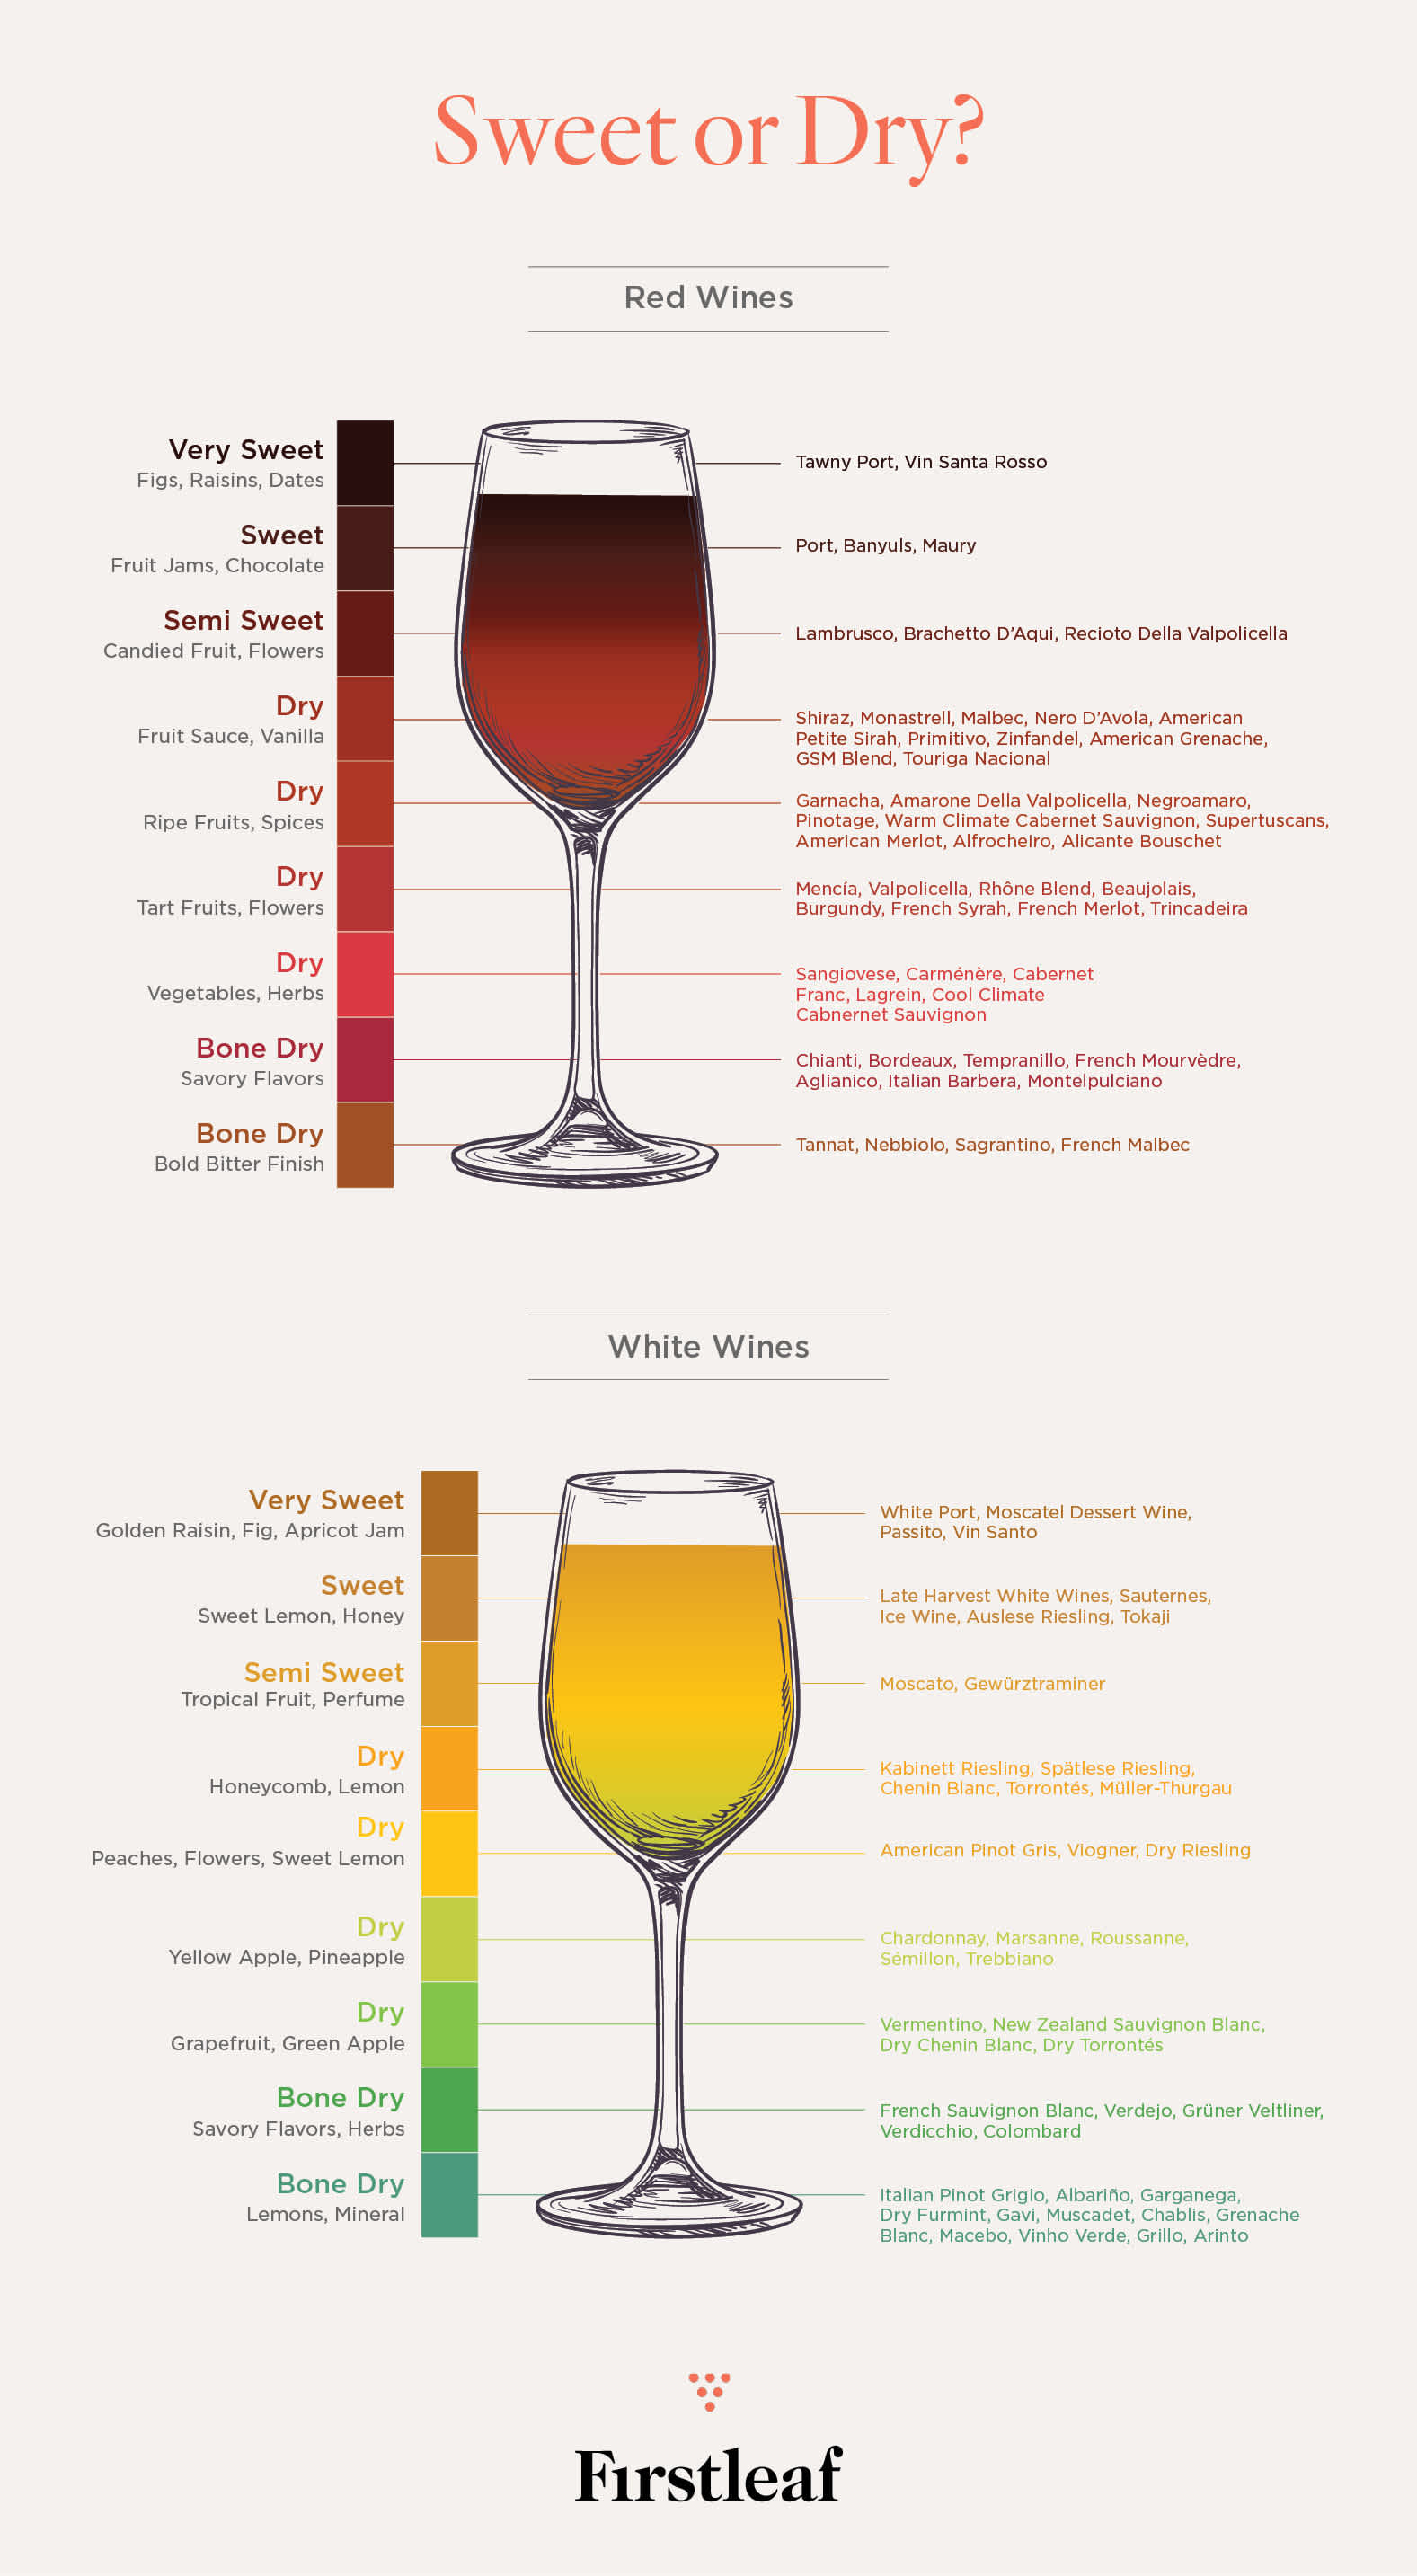 Dry vs Sweet Wine: How To Tell the Difference